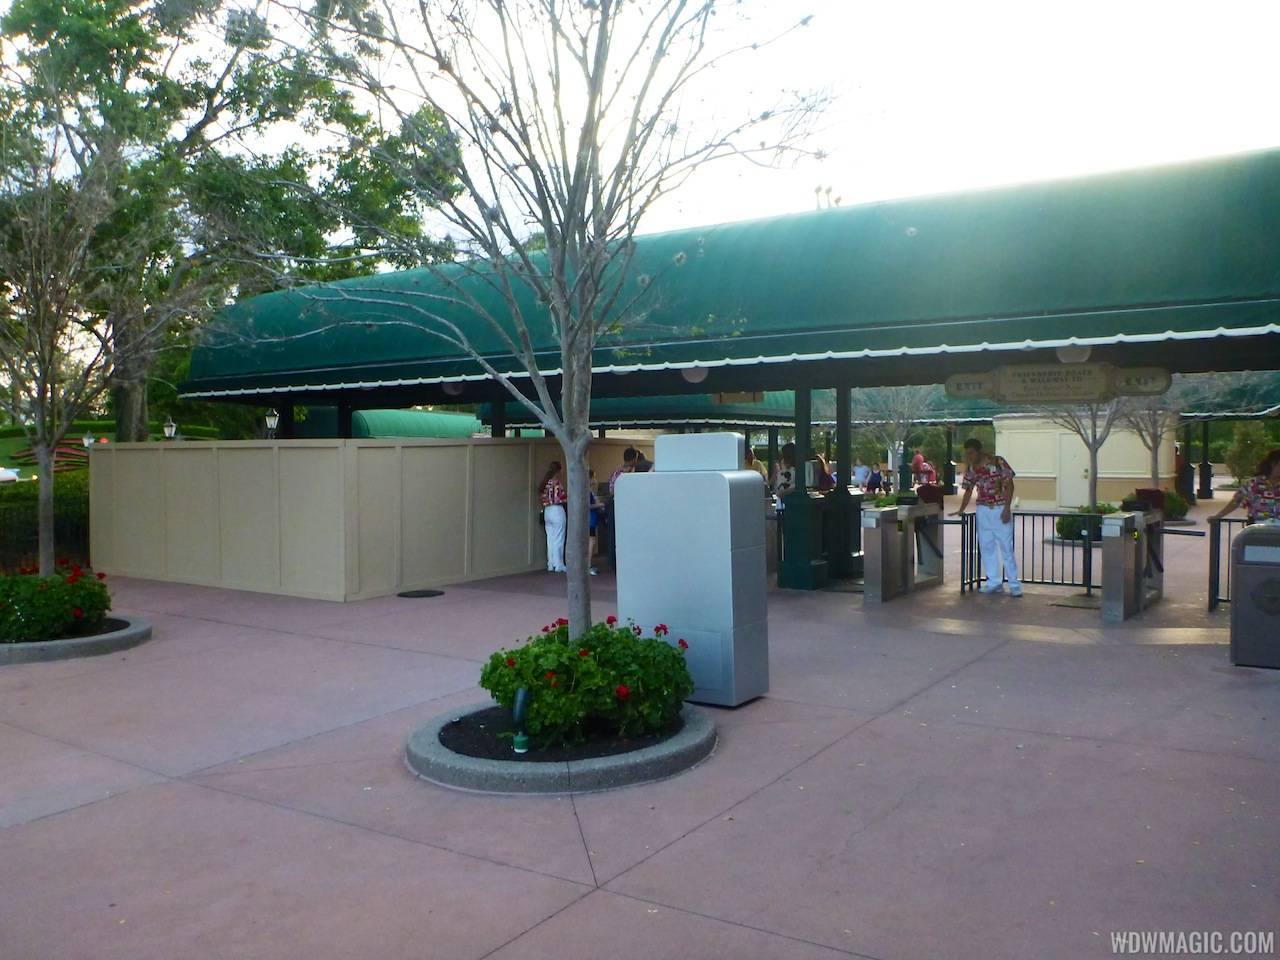 PHOTOS - MyMagic+ 'Touch to Enter' RFID turnstiles now being installed at Epcot's International Gateway